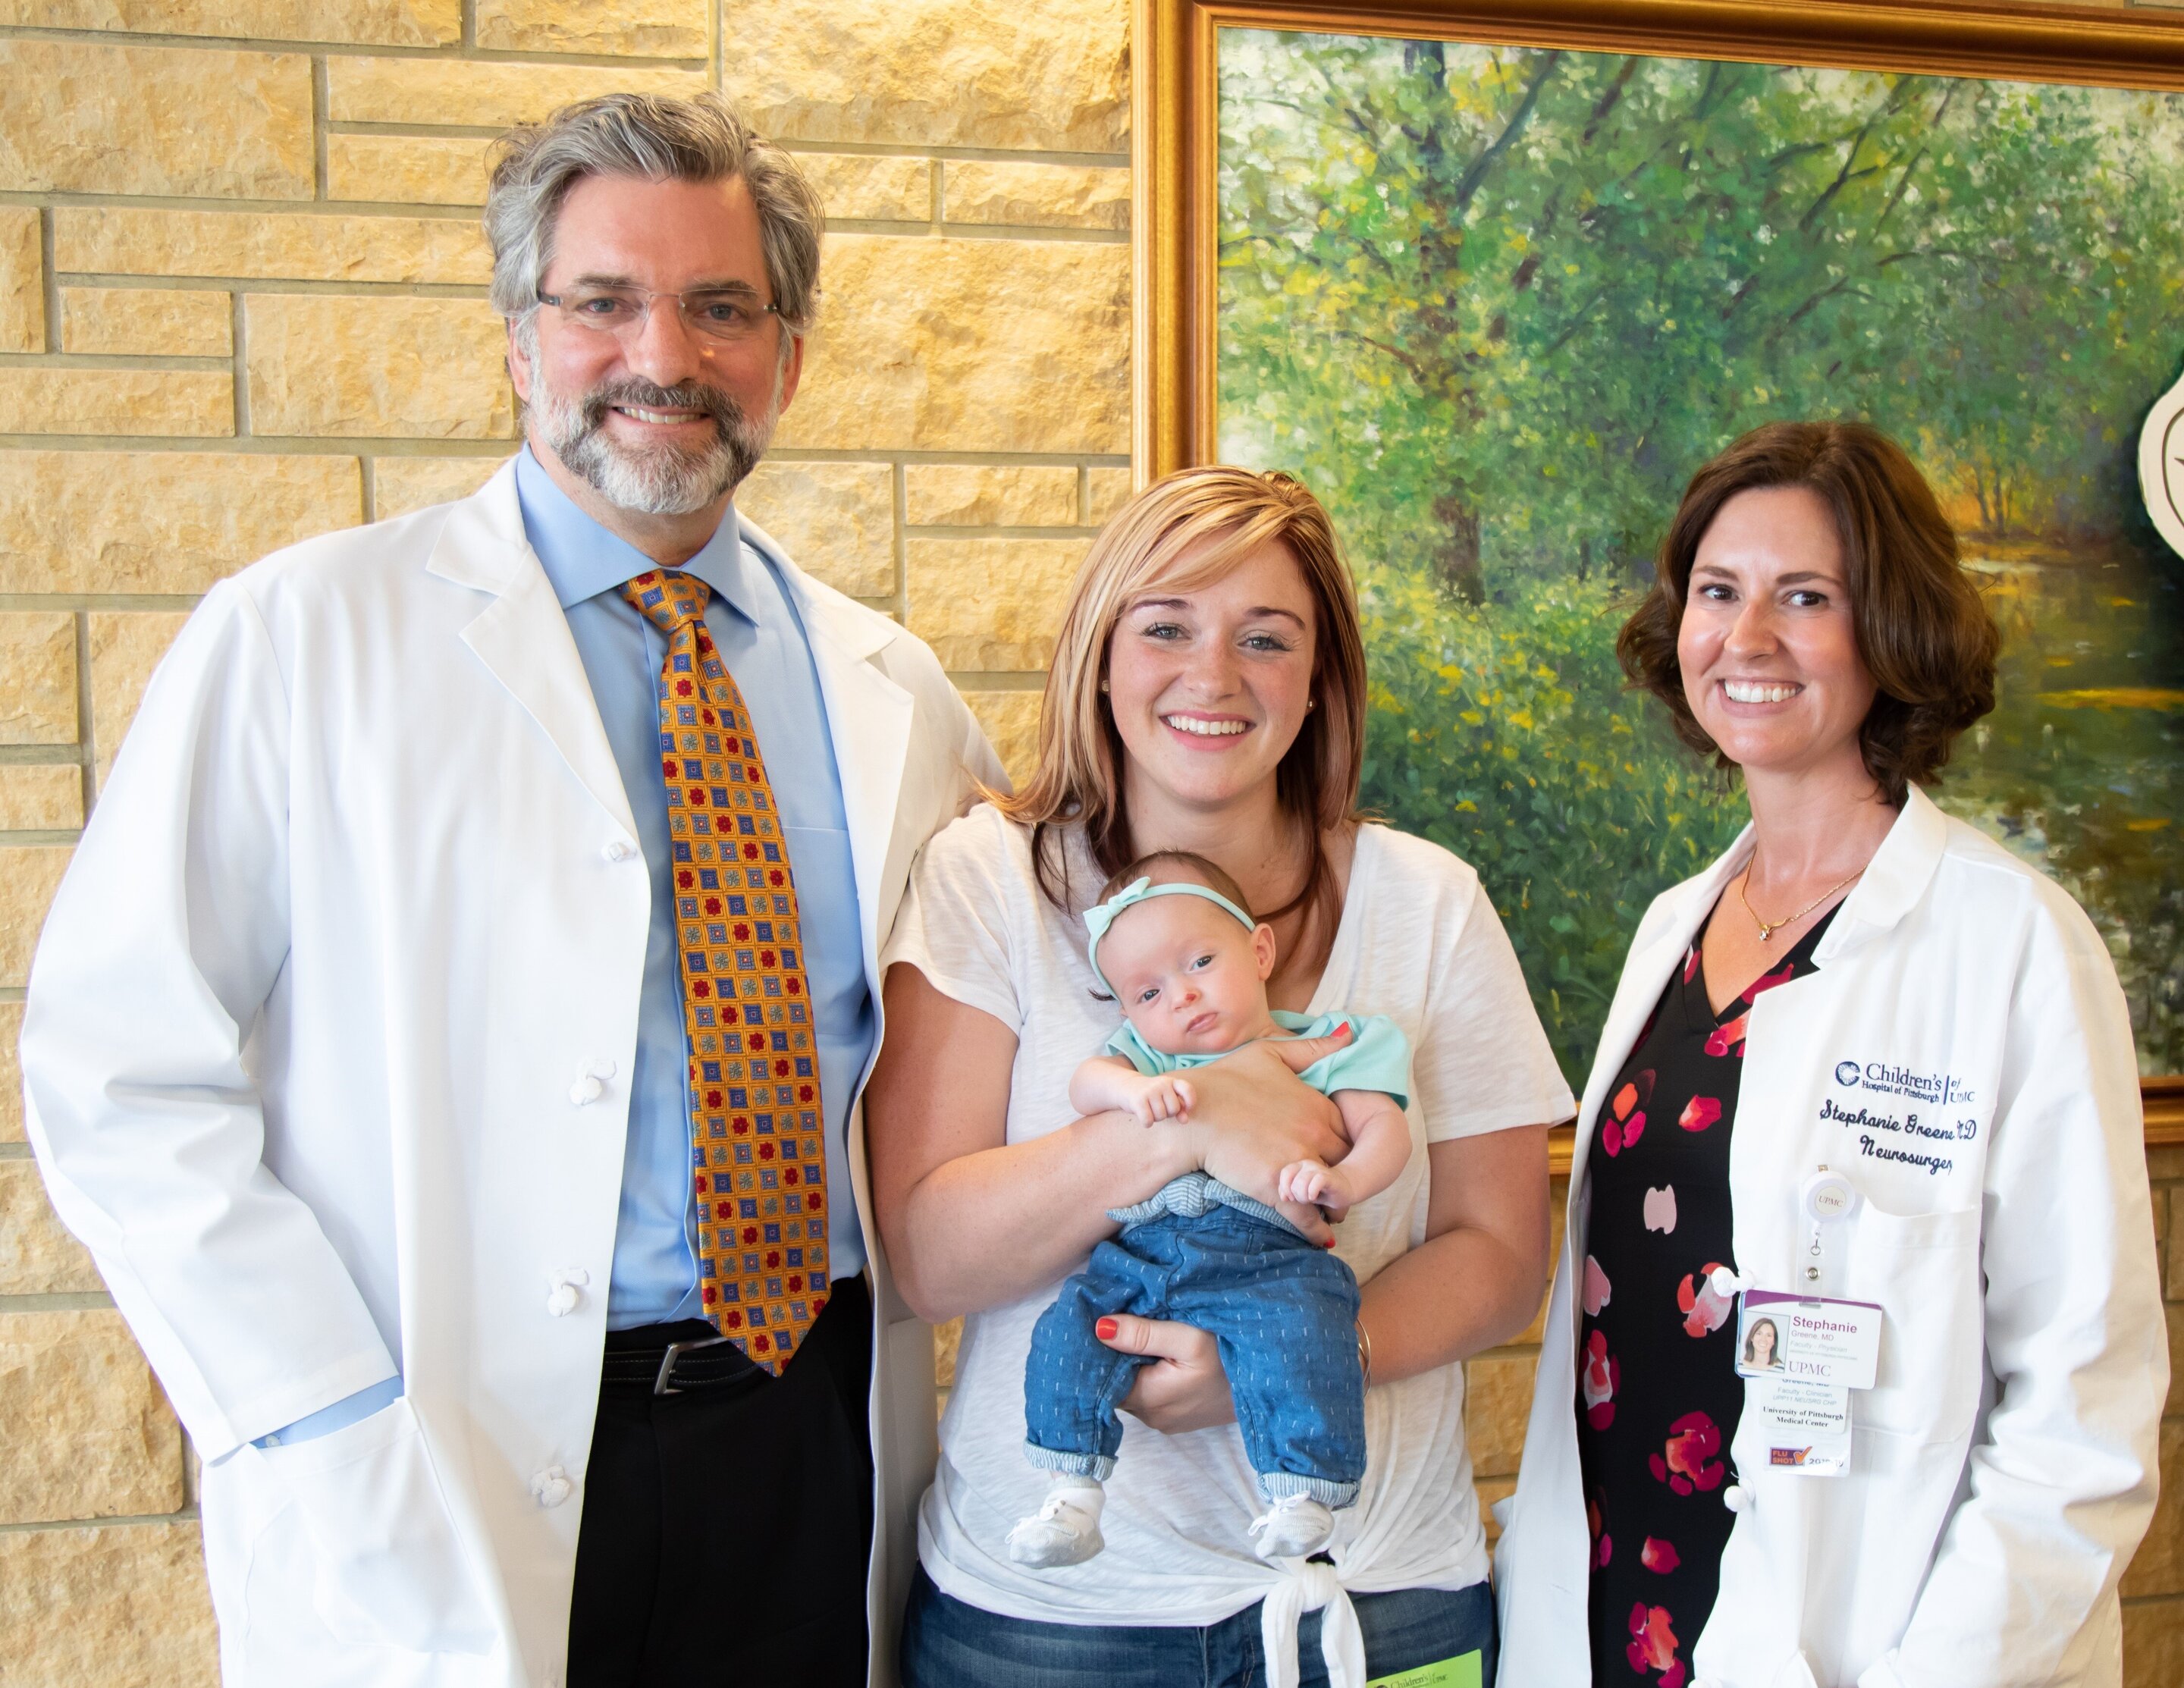 First-ever in-utero surgery to treat spina bifida